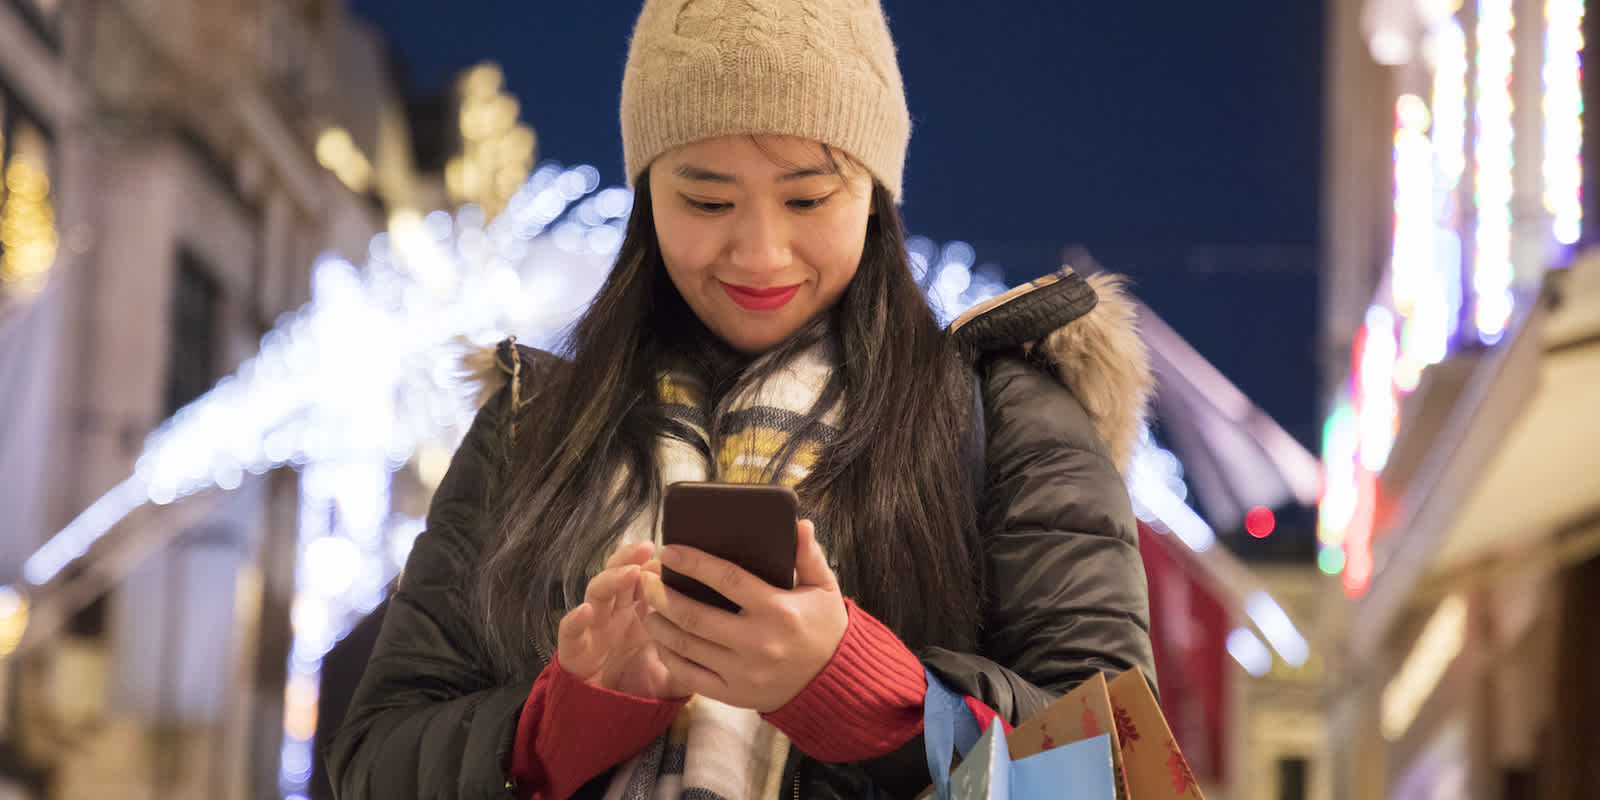 A recent study from Capterra reports SMBs in retail and ecommerce are expecting a good holiday season in 2022.